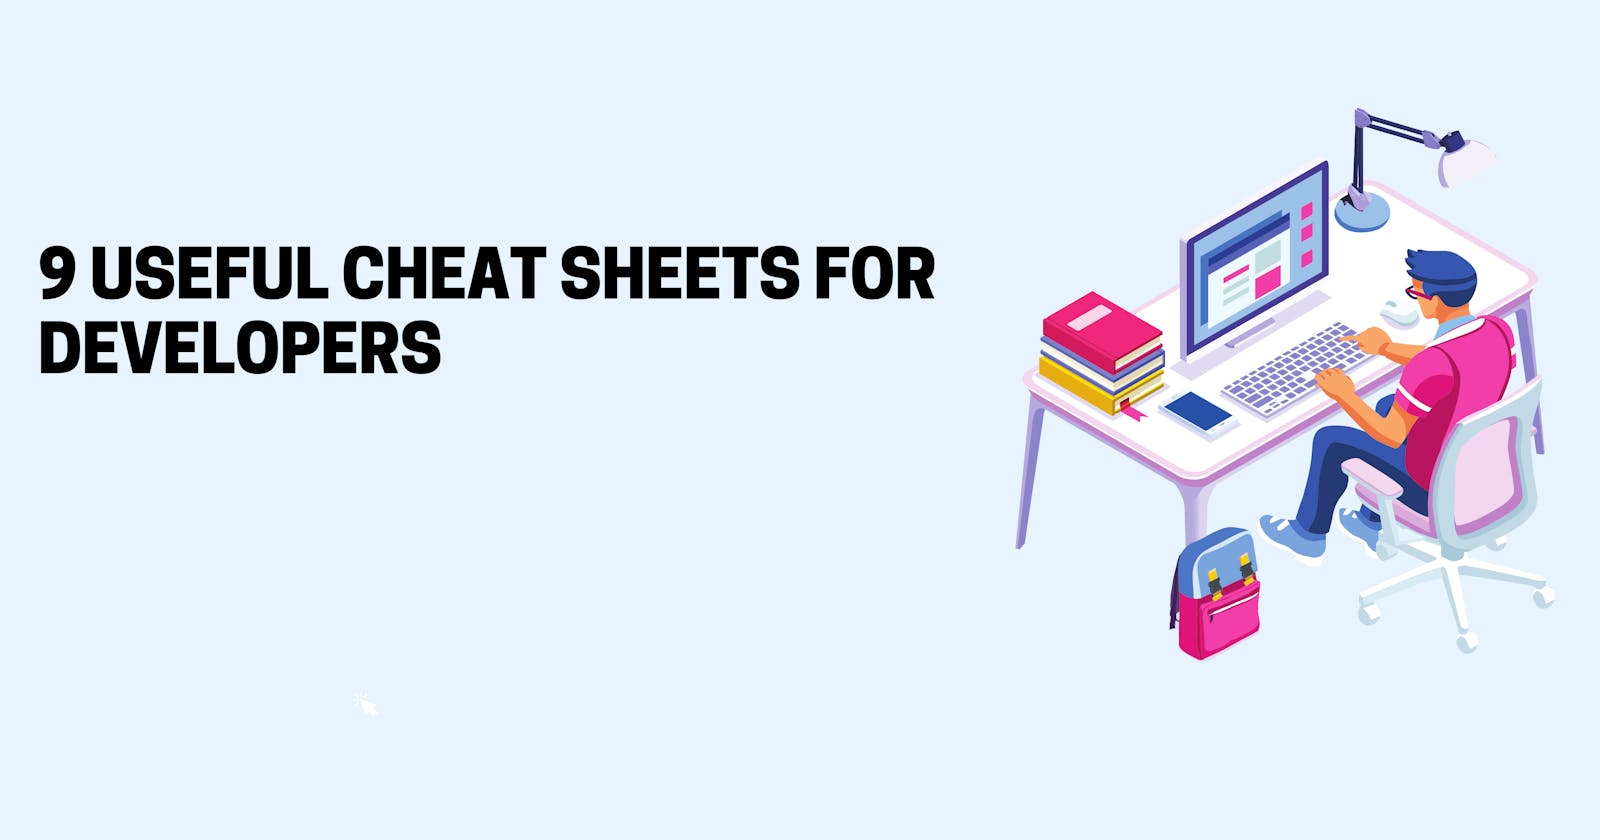 9 Useful Cheat Sheets for Developers